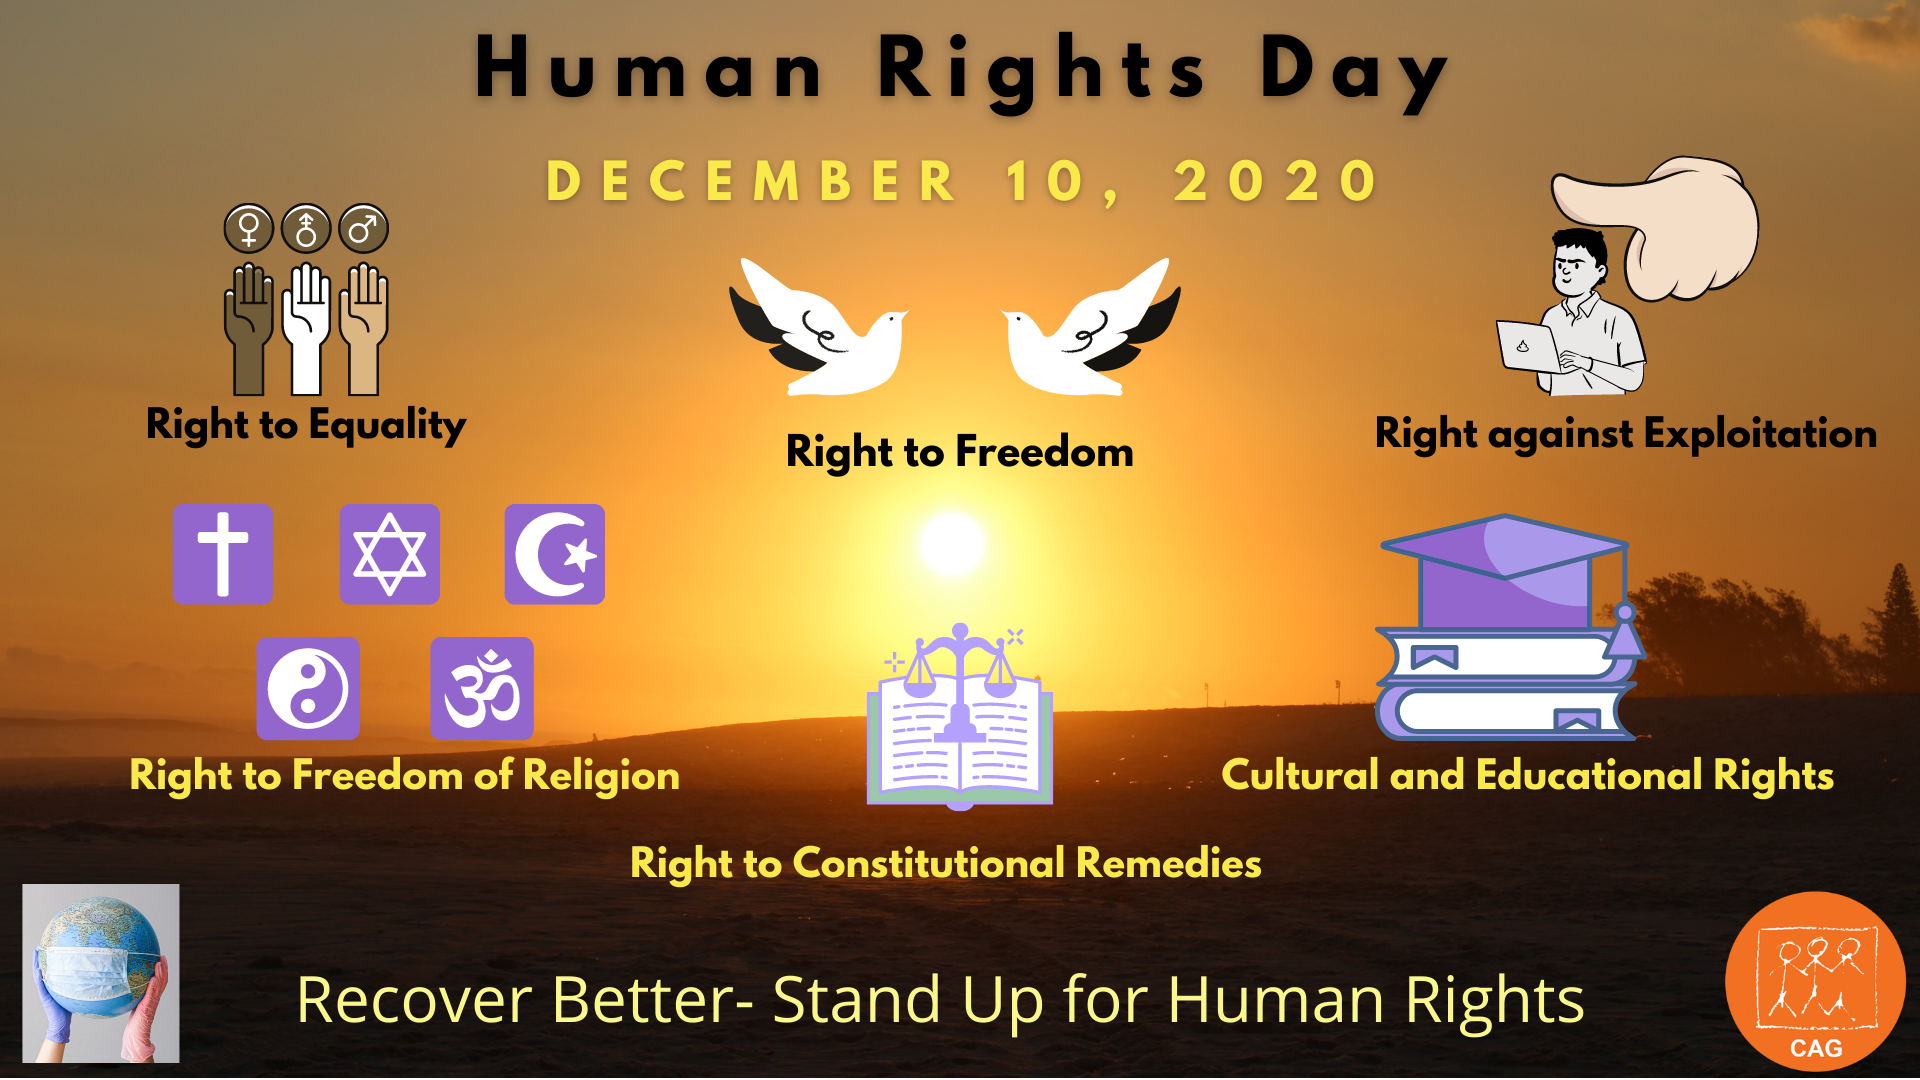 Human rights day 2020